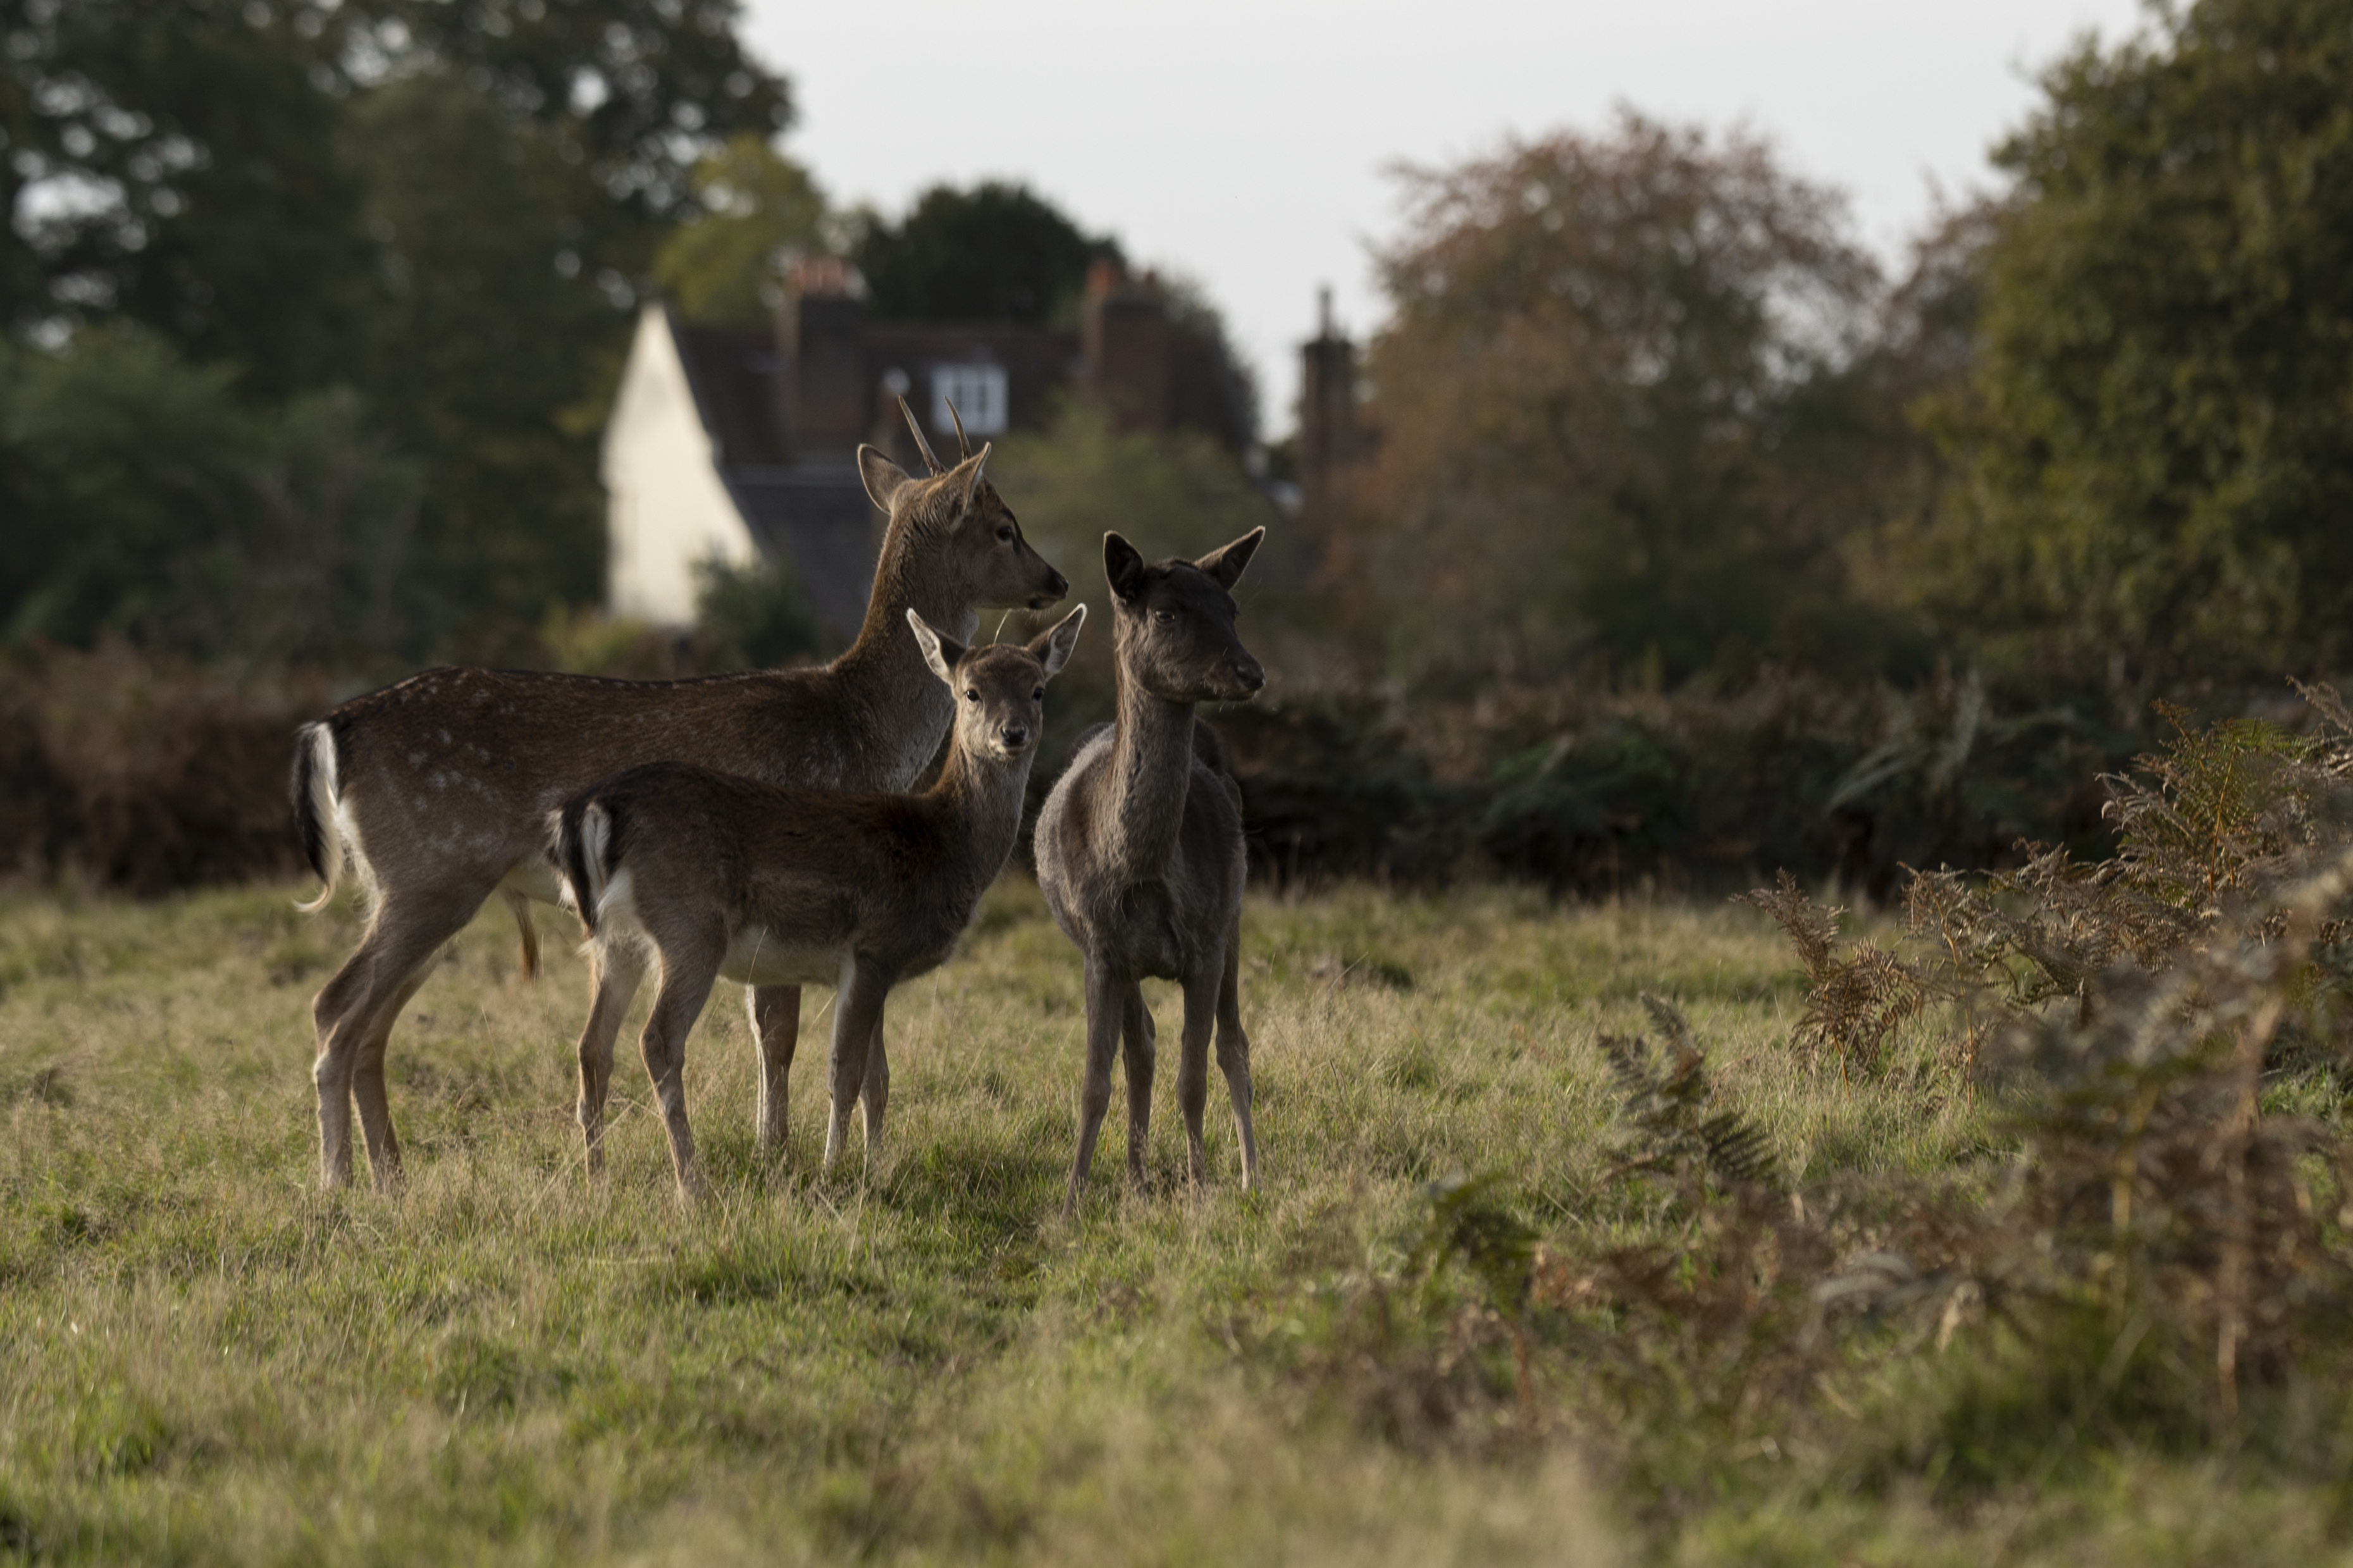 Three deer photographed on the Sony A7 IV camera